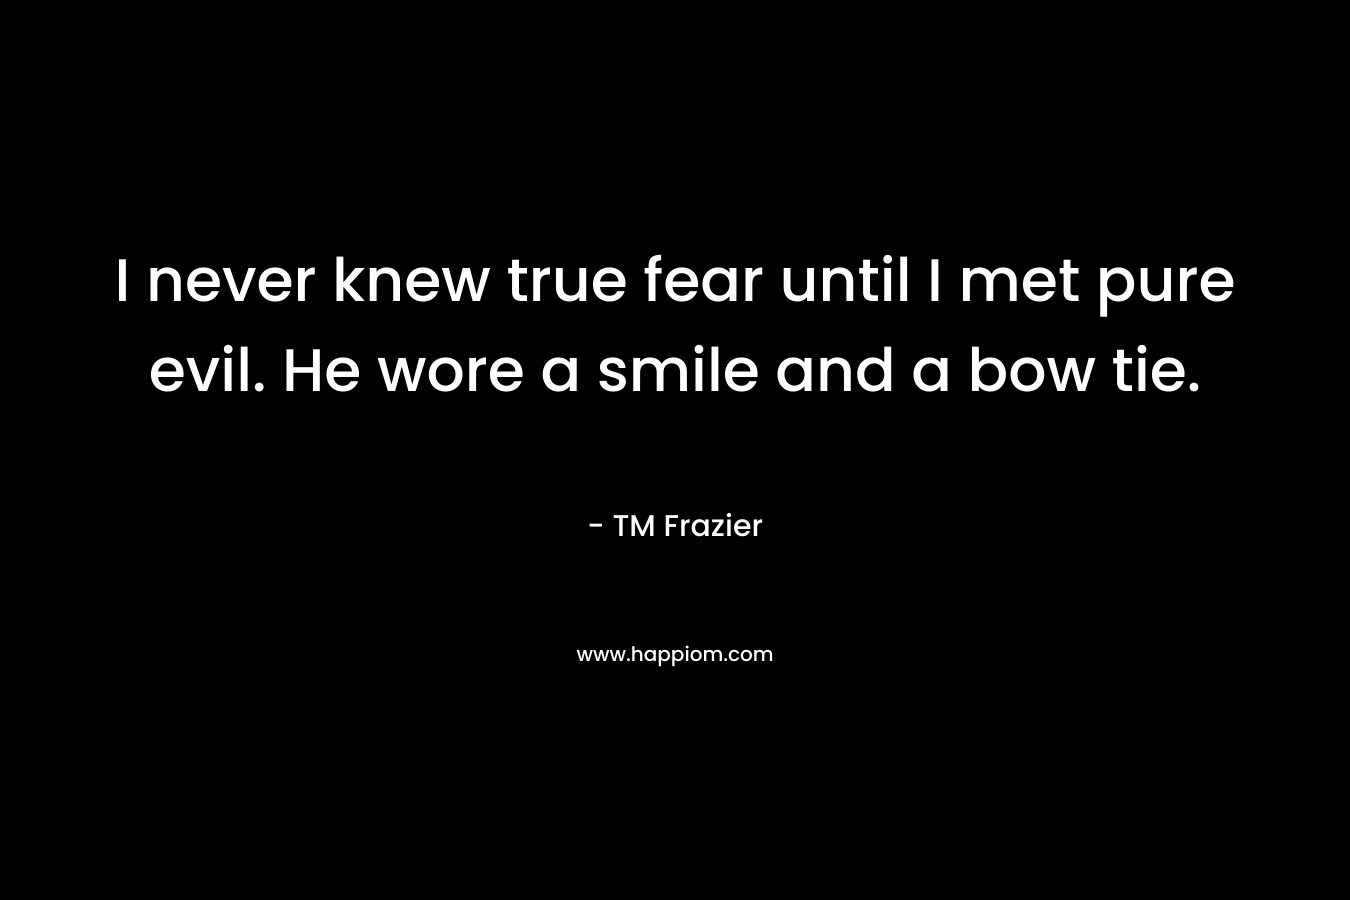 I never knew true fear until I met pure evil. He wore a smile and a bow tie. – TM Frazier